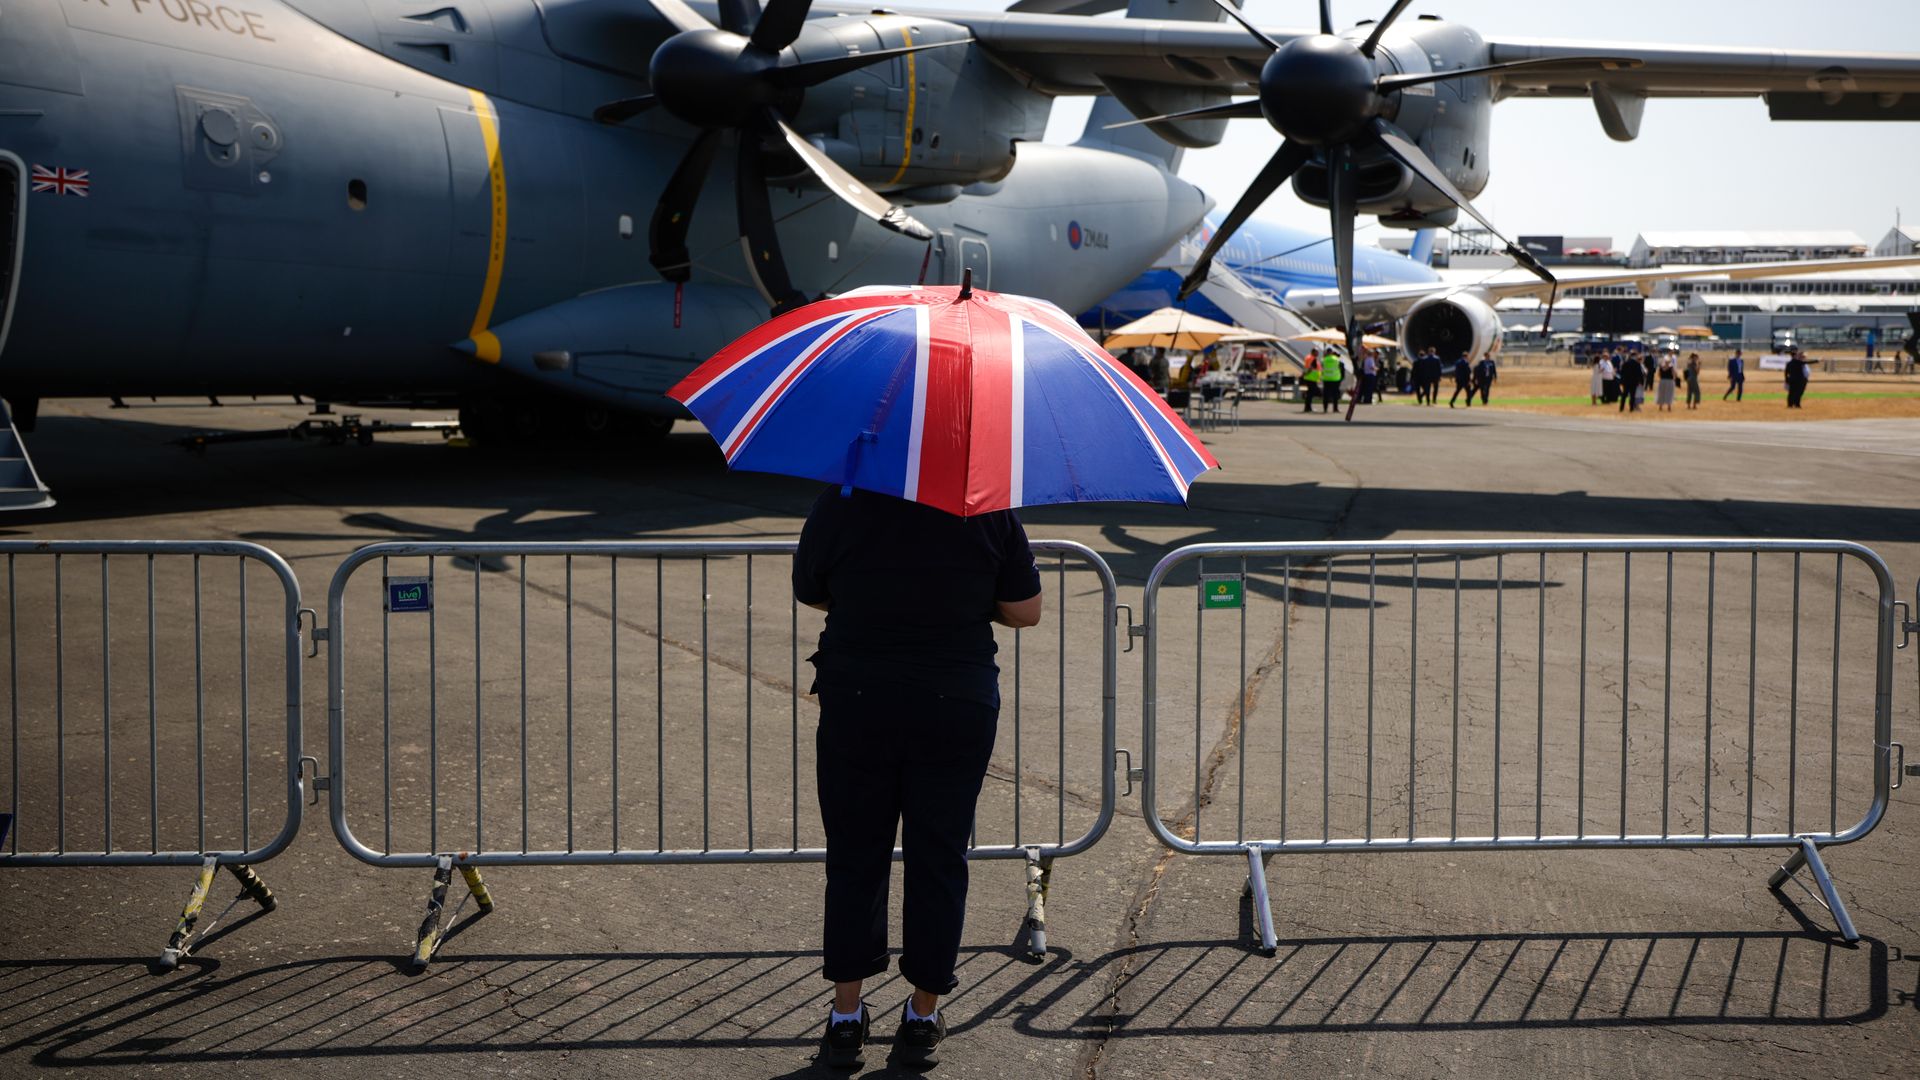  An attendee shelters from the sun under a Union Jack umbrella, during a heatwave, on the opening day of the Farnborough International Airshow in Farnborough, UK, on Monday, July 18, 2022.